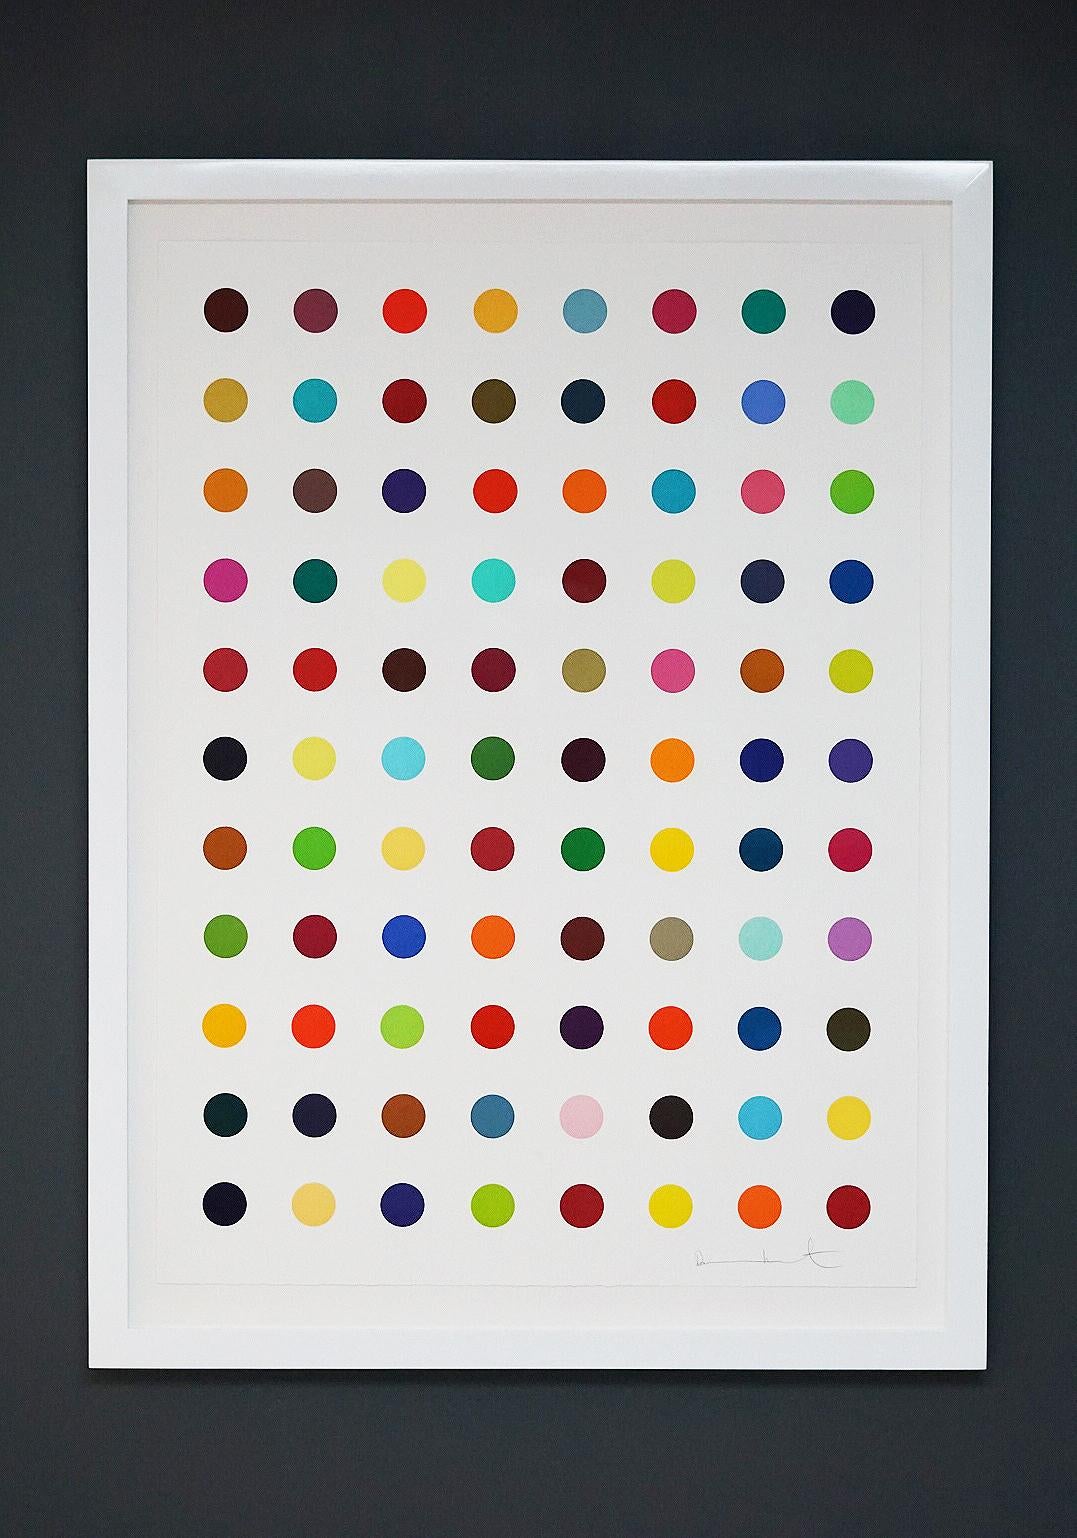 Multi-color "Spots" by Damien Hirst  is created in a limited edition of 55. The "Spot Series”  is one of Hirst's most recognizable series, with over 1000 variations (created over the past 25 years) currently in existence. Each edition of woodcut